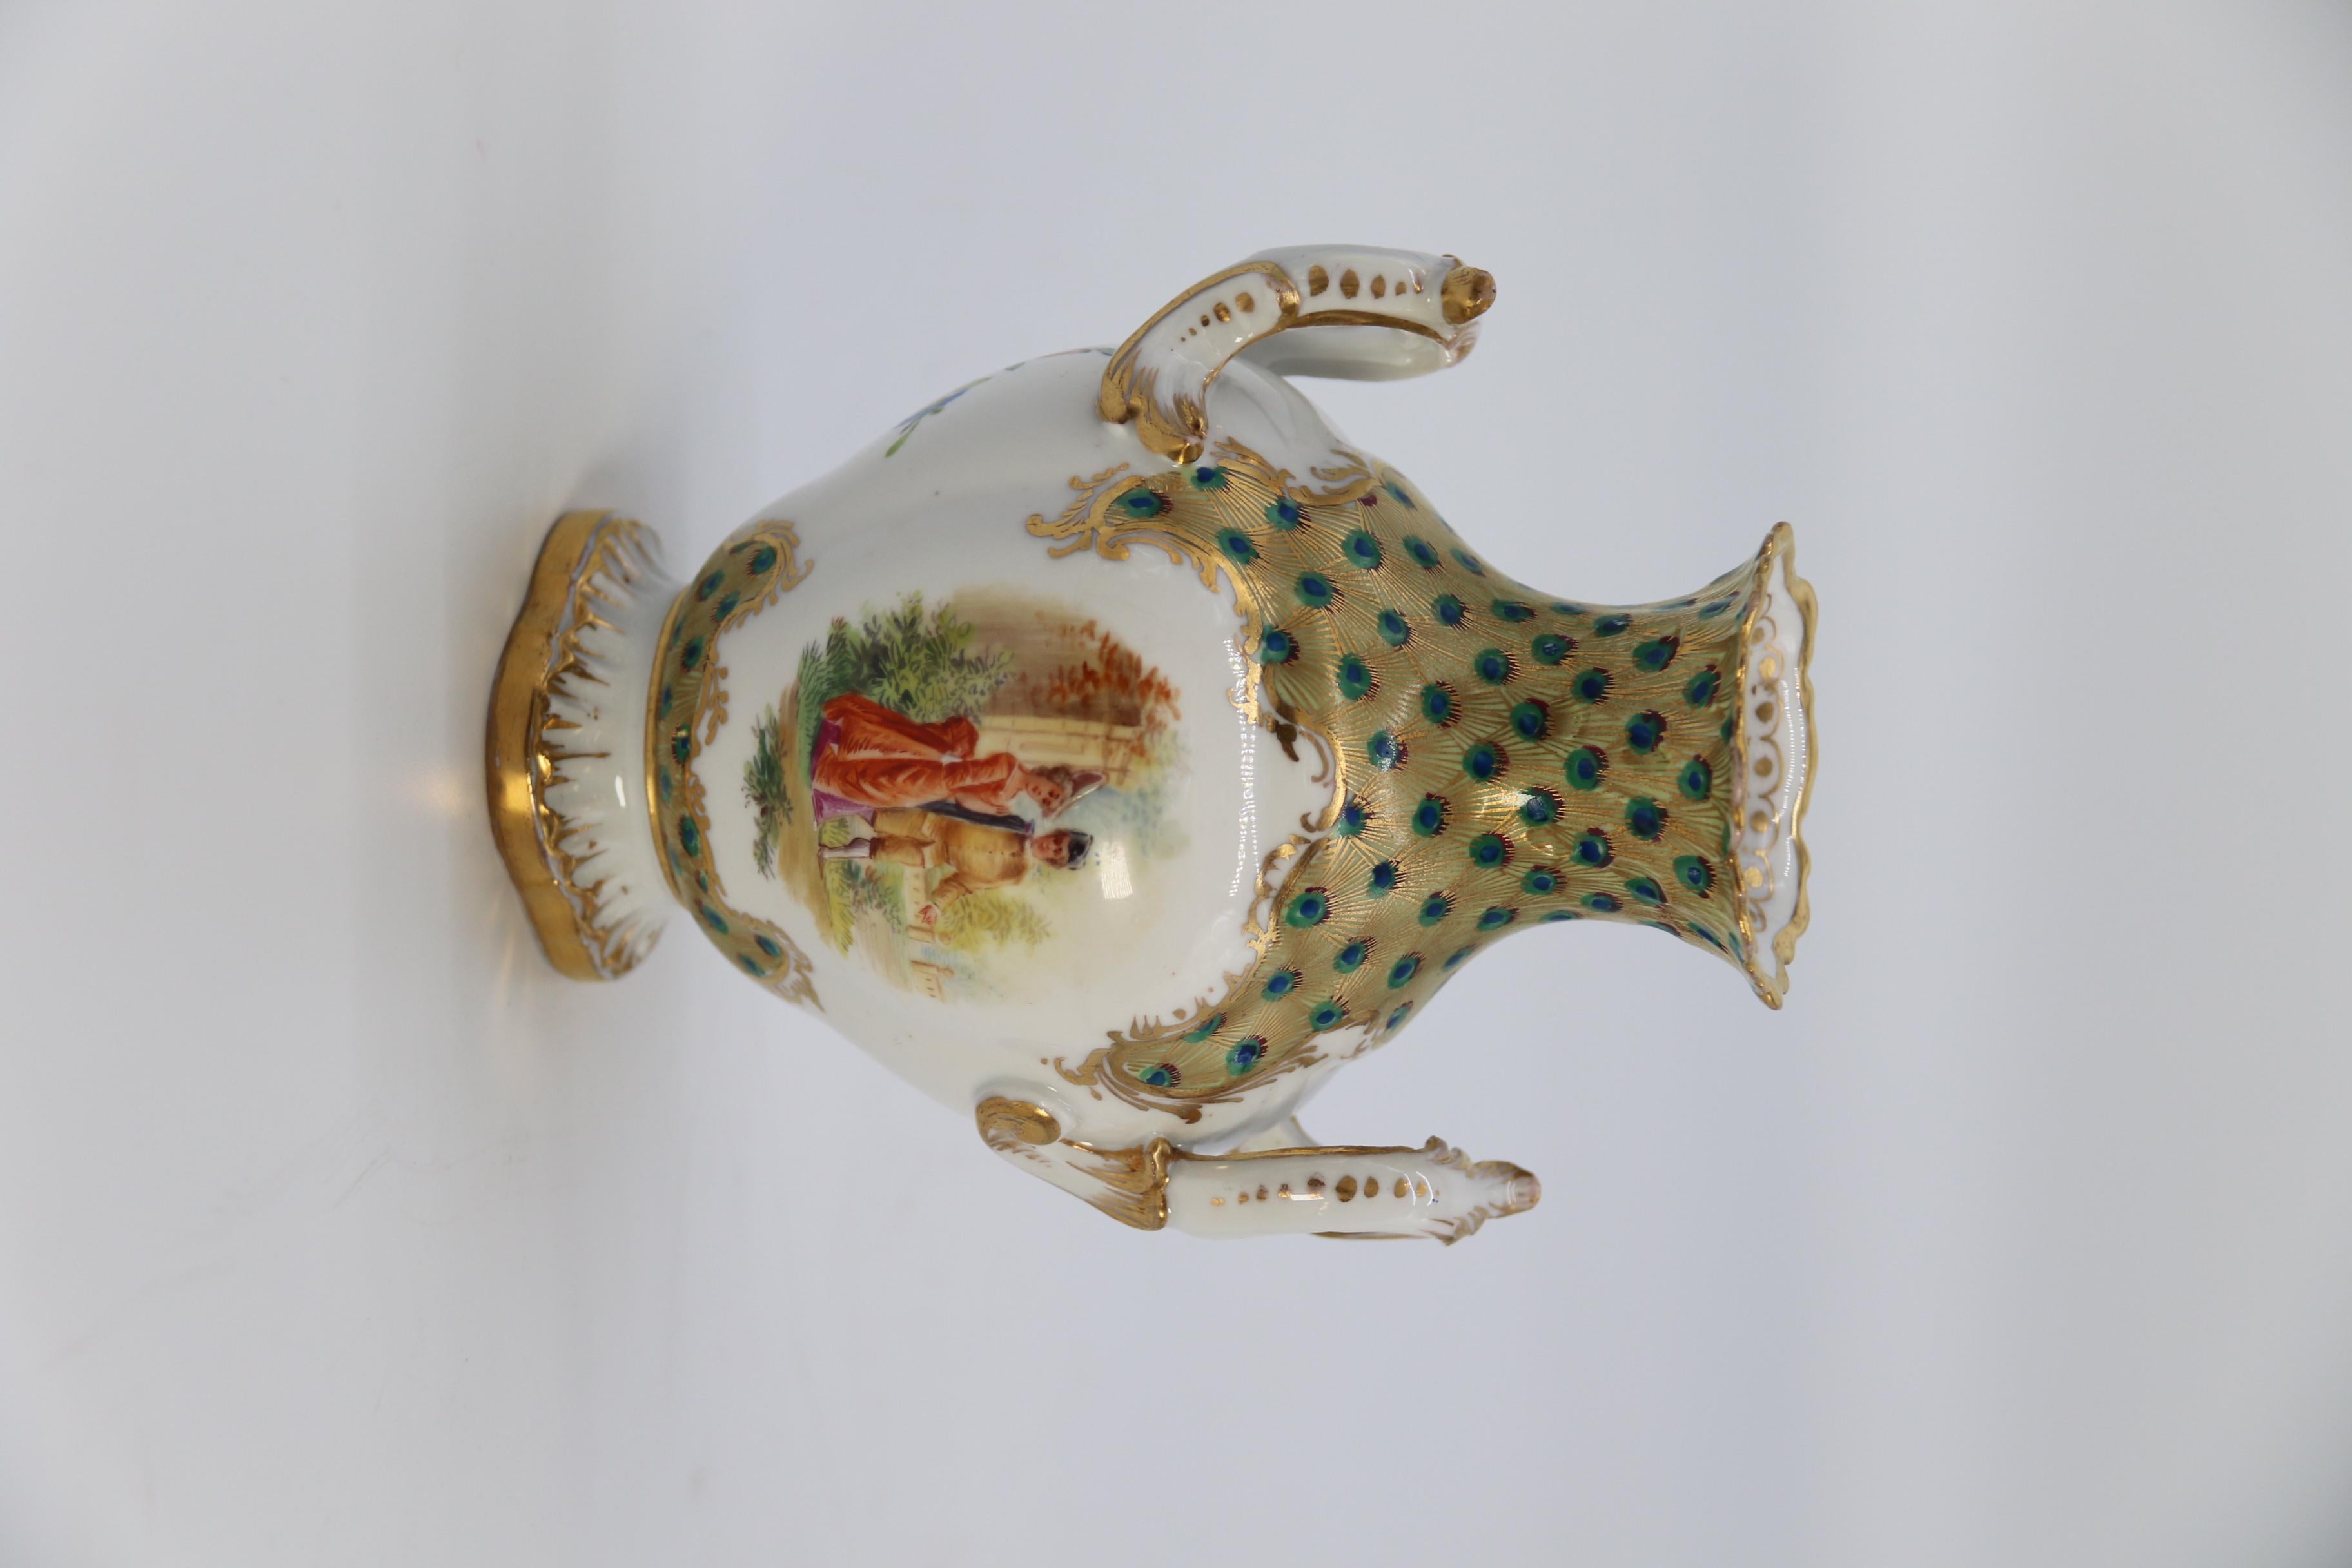 This exceptionally beautiful hand painted vase was made at the Dresden Porcelain Factory in Germany, circa 1900. It is a small twin handled Rocco revival porcelain vase with a most unusual brightly decorated collar of hand painted and gilded peacock